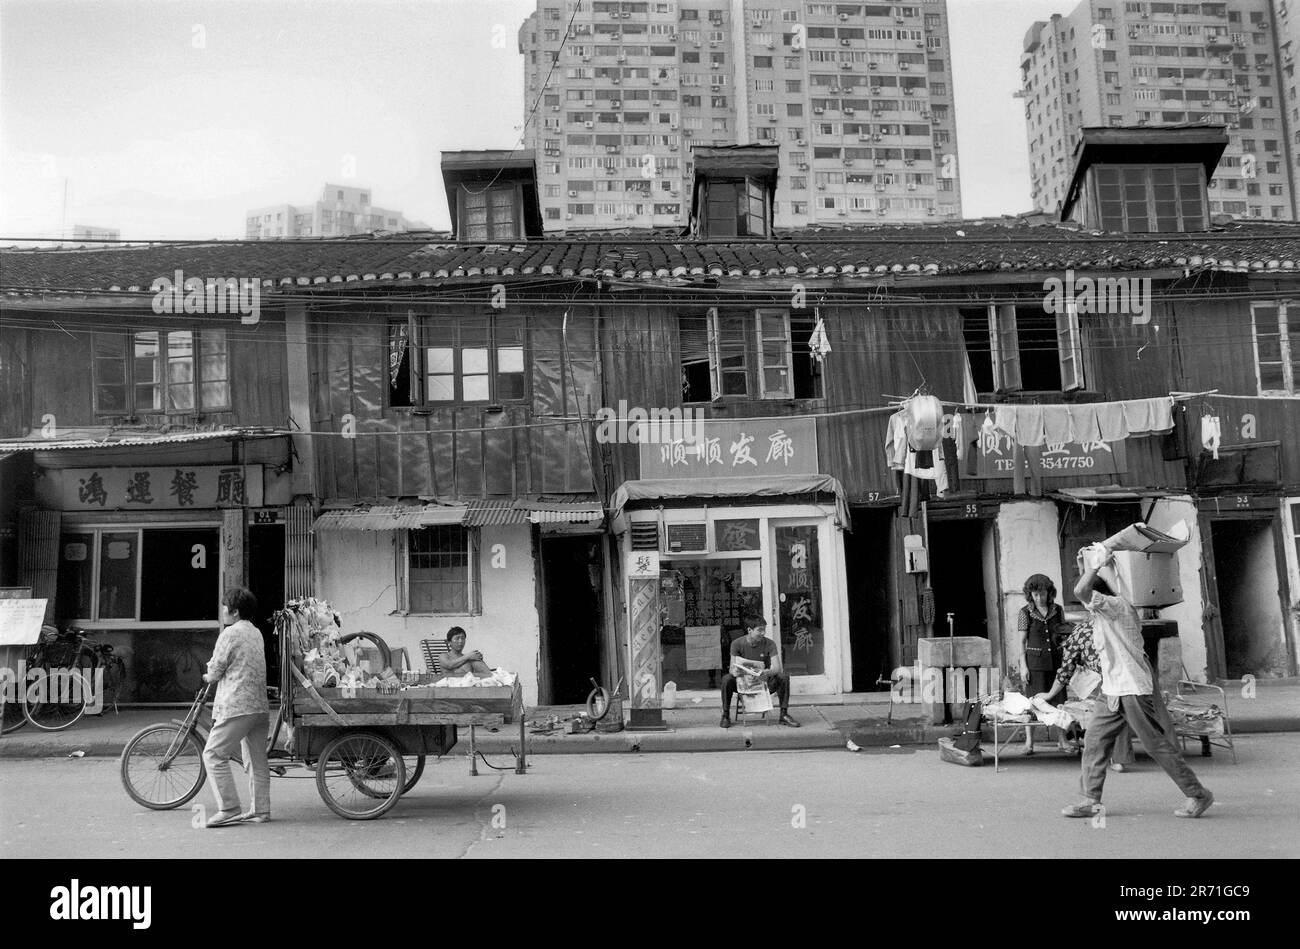 Shanghai China 2000. High-density, high-rise blocks tower over traditional-style Shanghai housing which will soon be demolished. 2000s HOMER SYKES Stock Photo